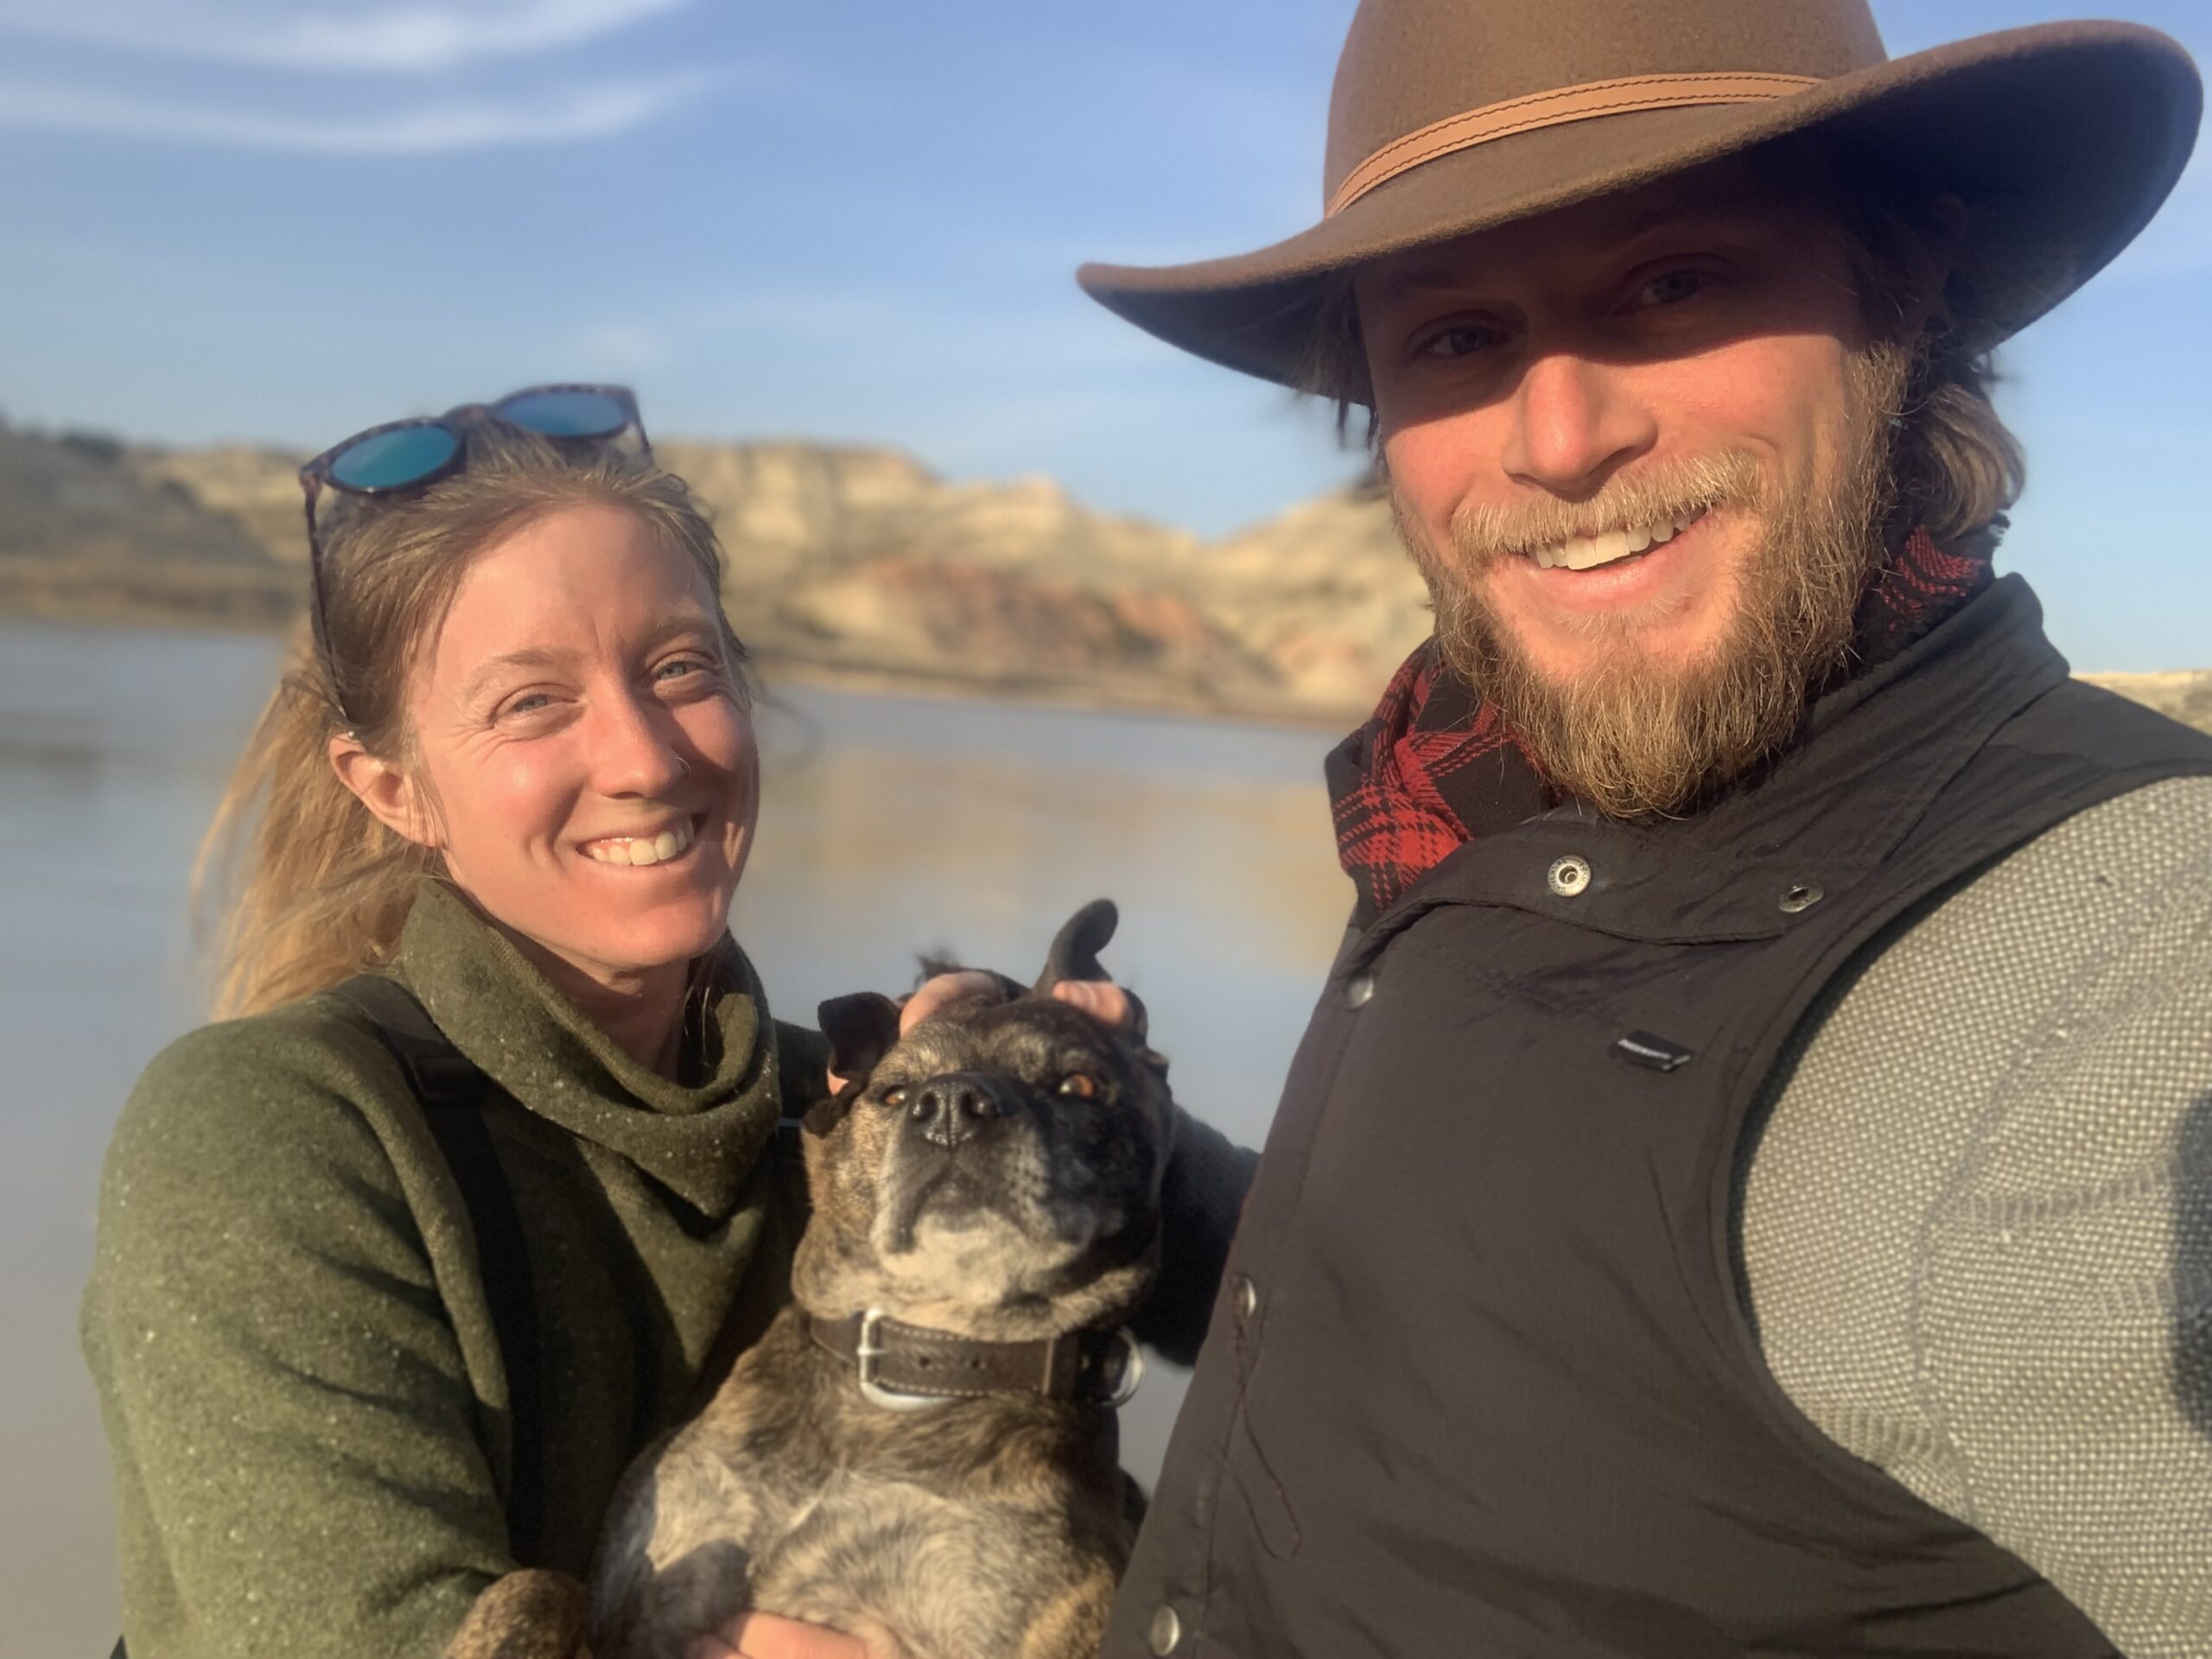 Lesley and Ryan smile for a selfie with their dog. the background reveals sandy cliffs at the shore of a large lake or reservoir